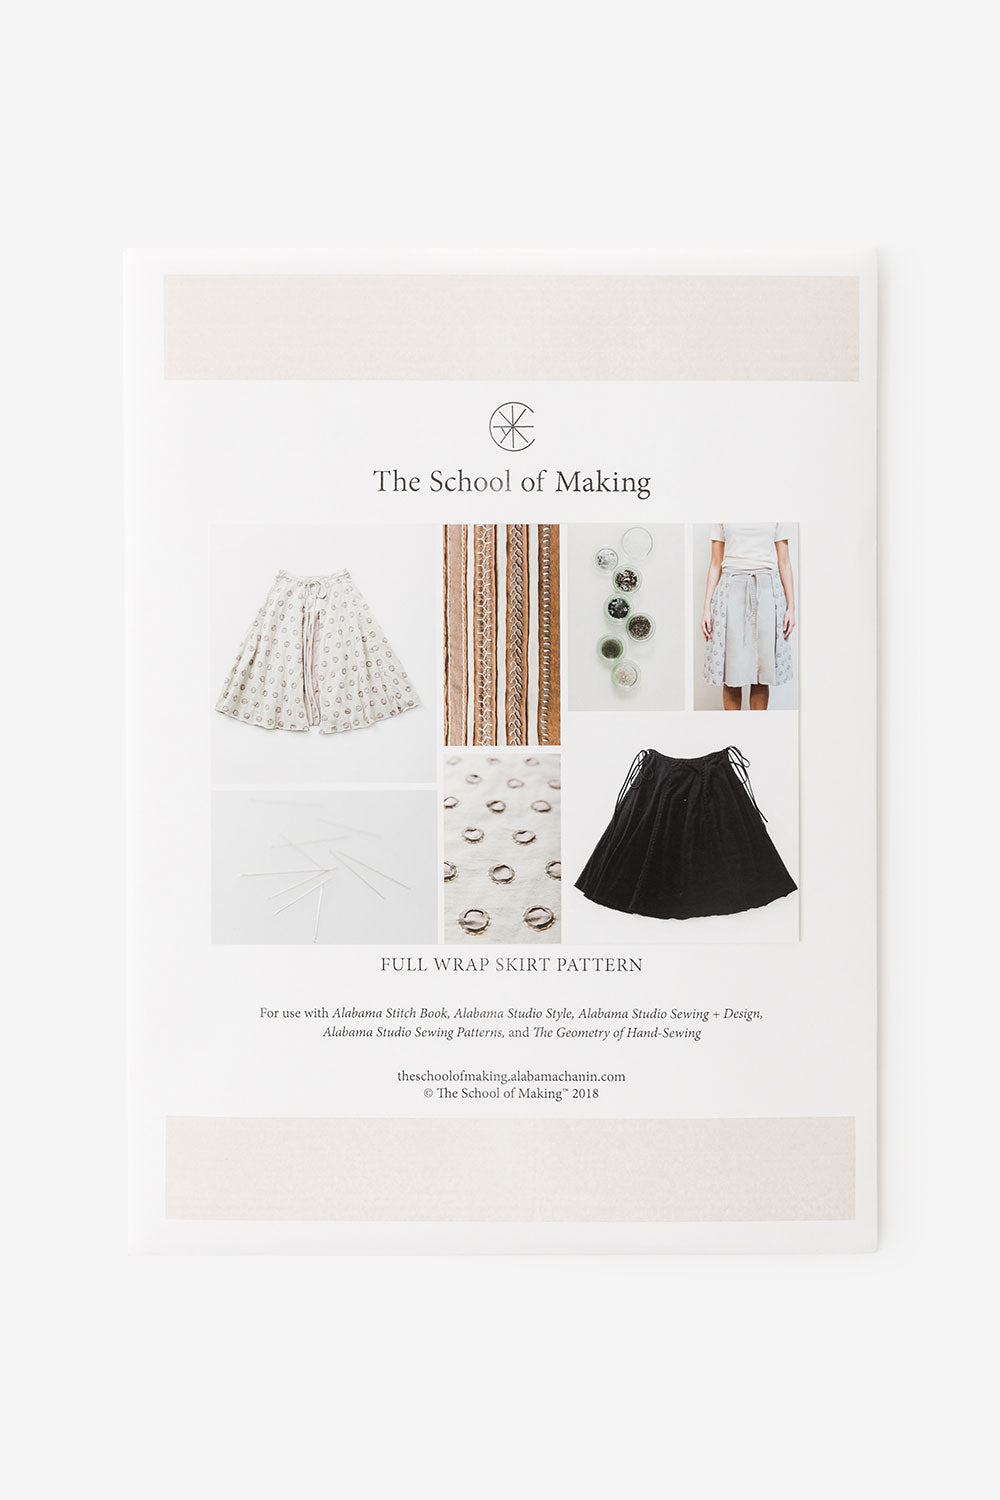 The School of Making Full Wrap Skirt Pattern Maker Supplies for Hand-Sewing